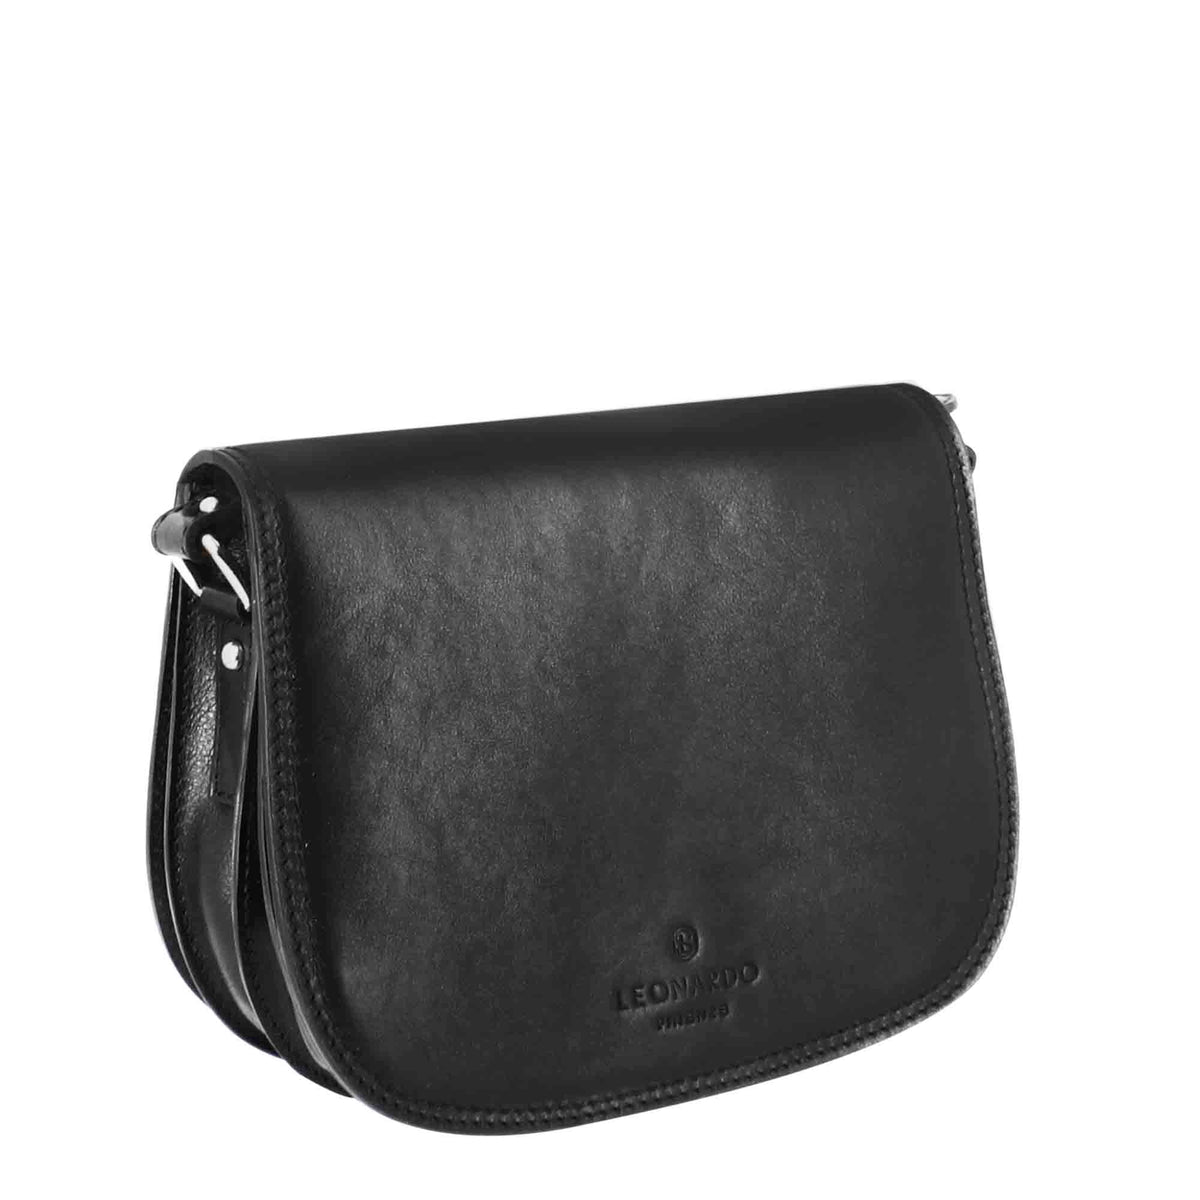 Essential women's bag in black smooth leather